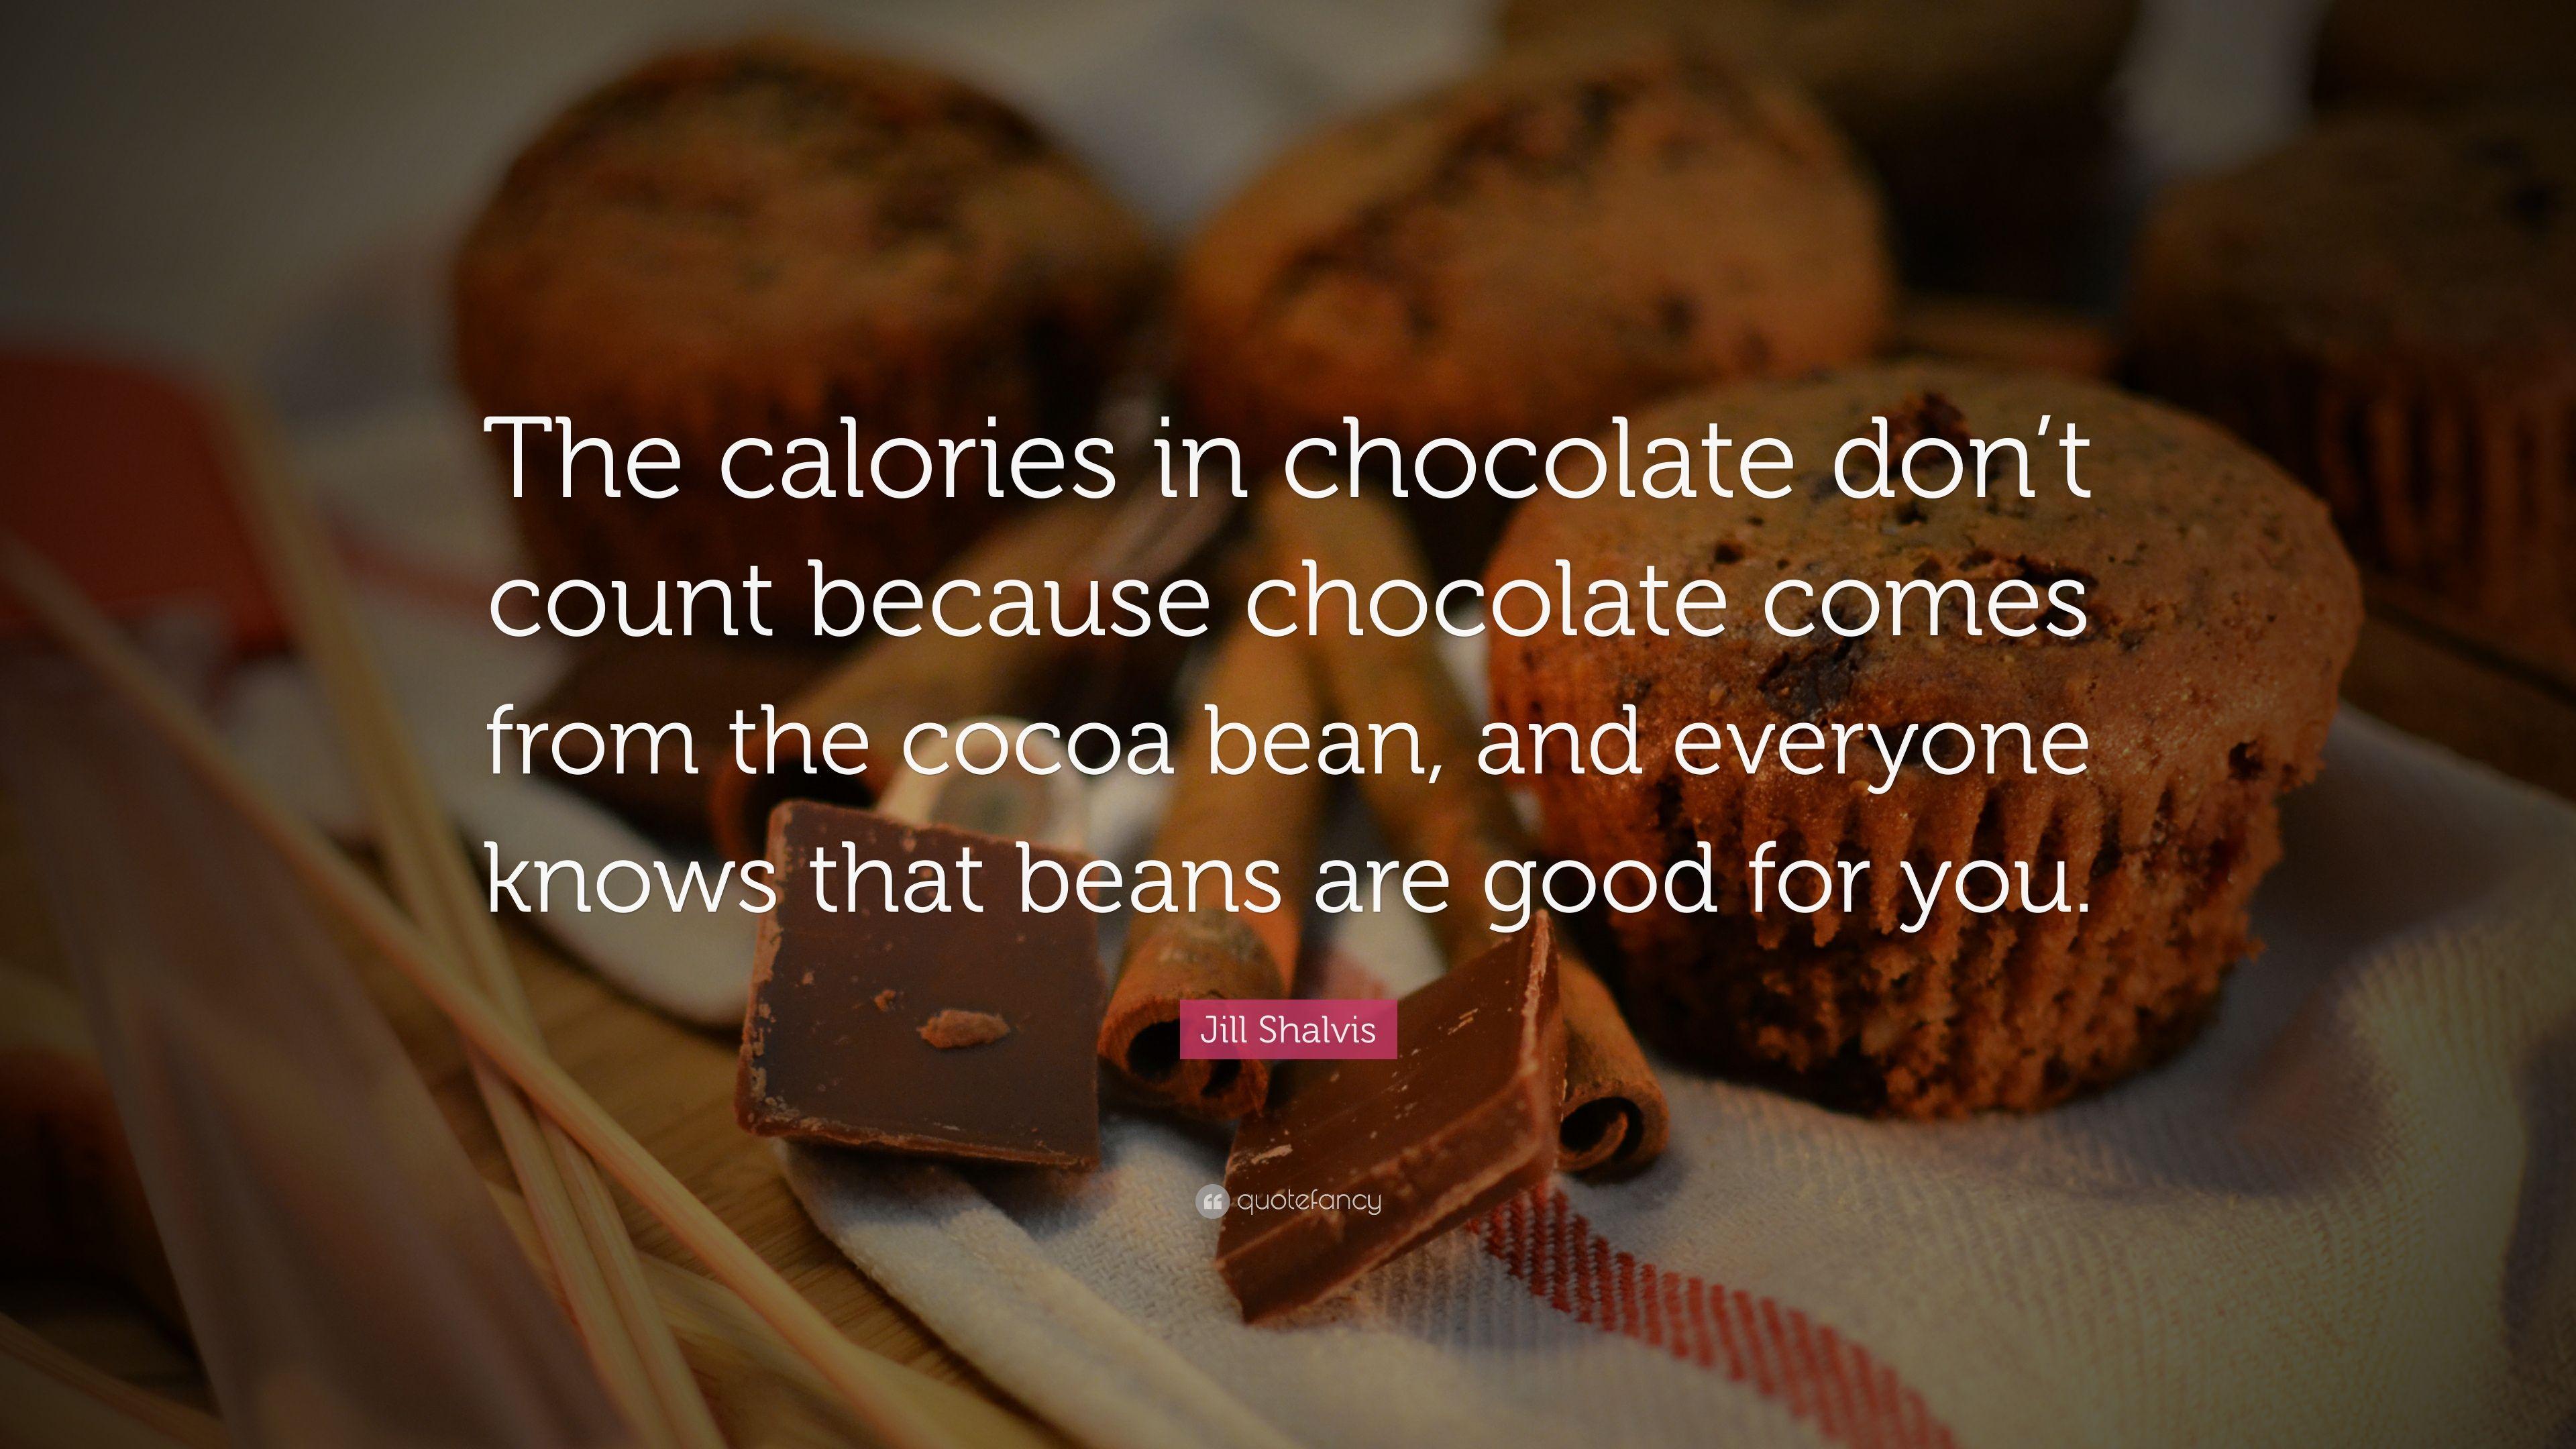 Jill Shalvis Quote: “The calories in chocolate don't count because